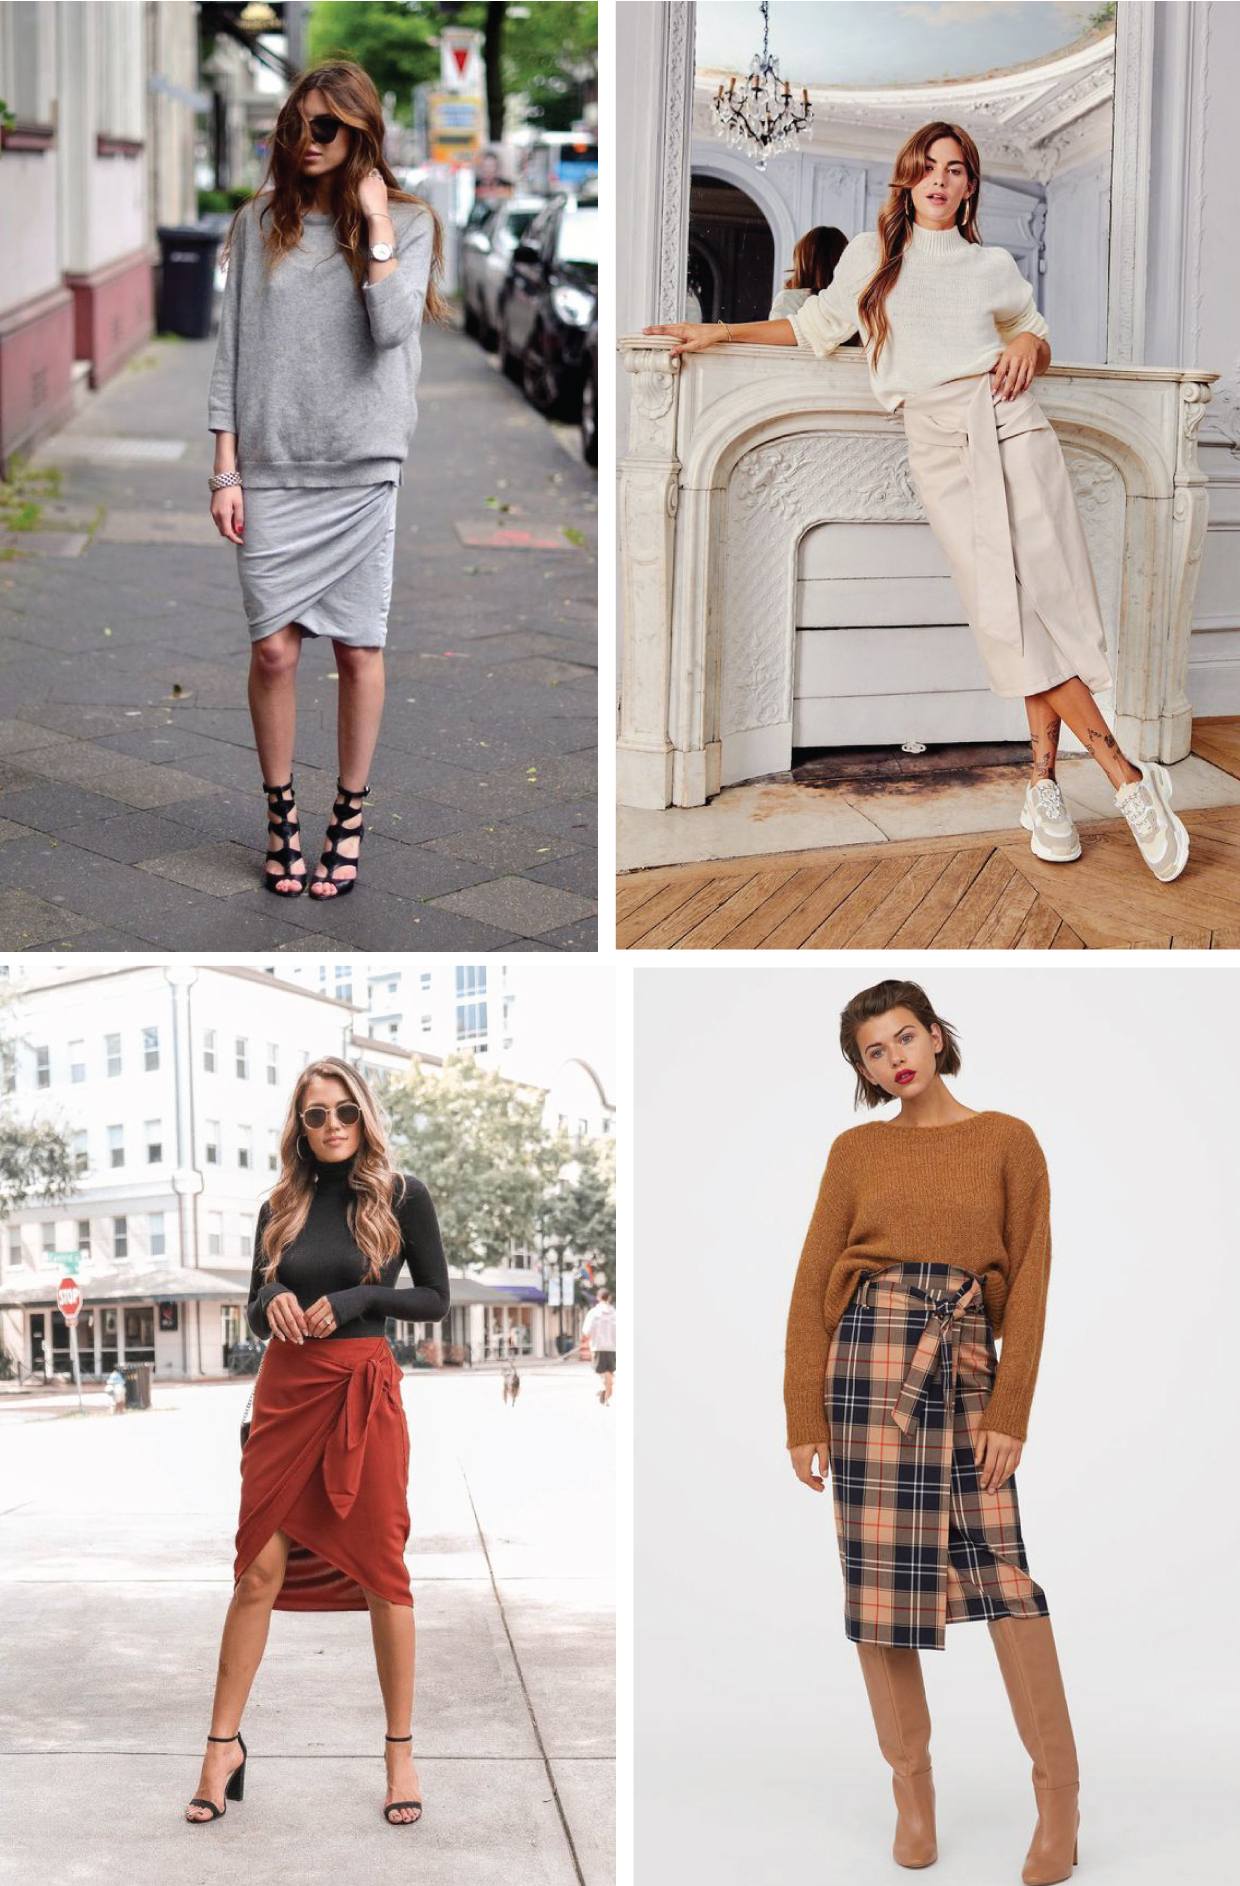 Fabric and Styling Inspiration for the Kensington Knit Skirt | Blog |  Oliver + S